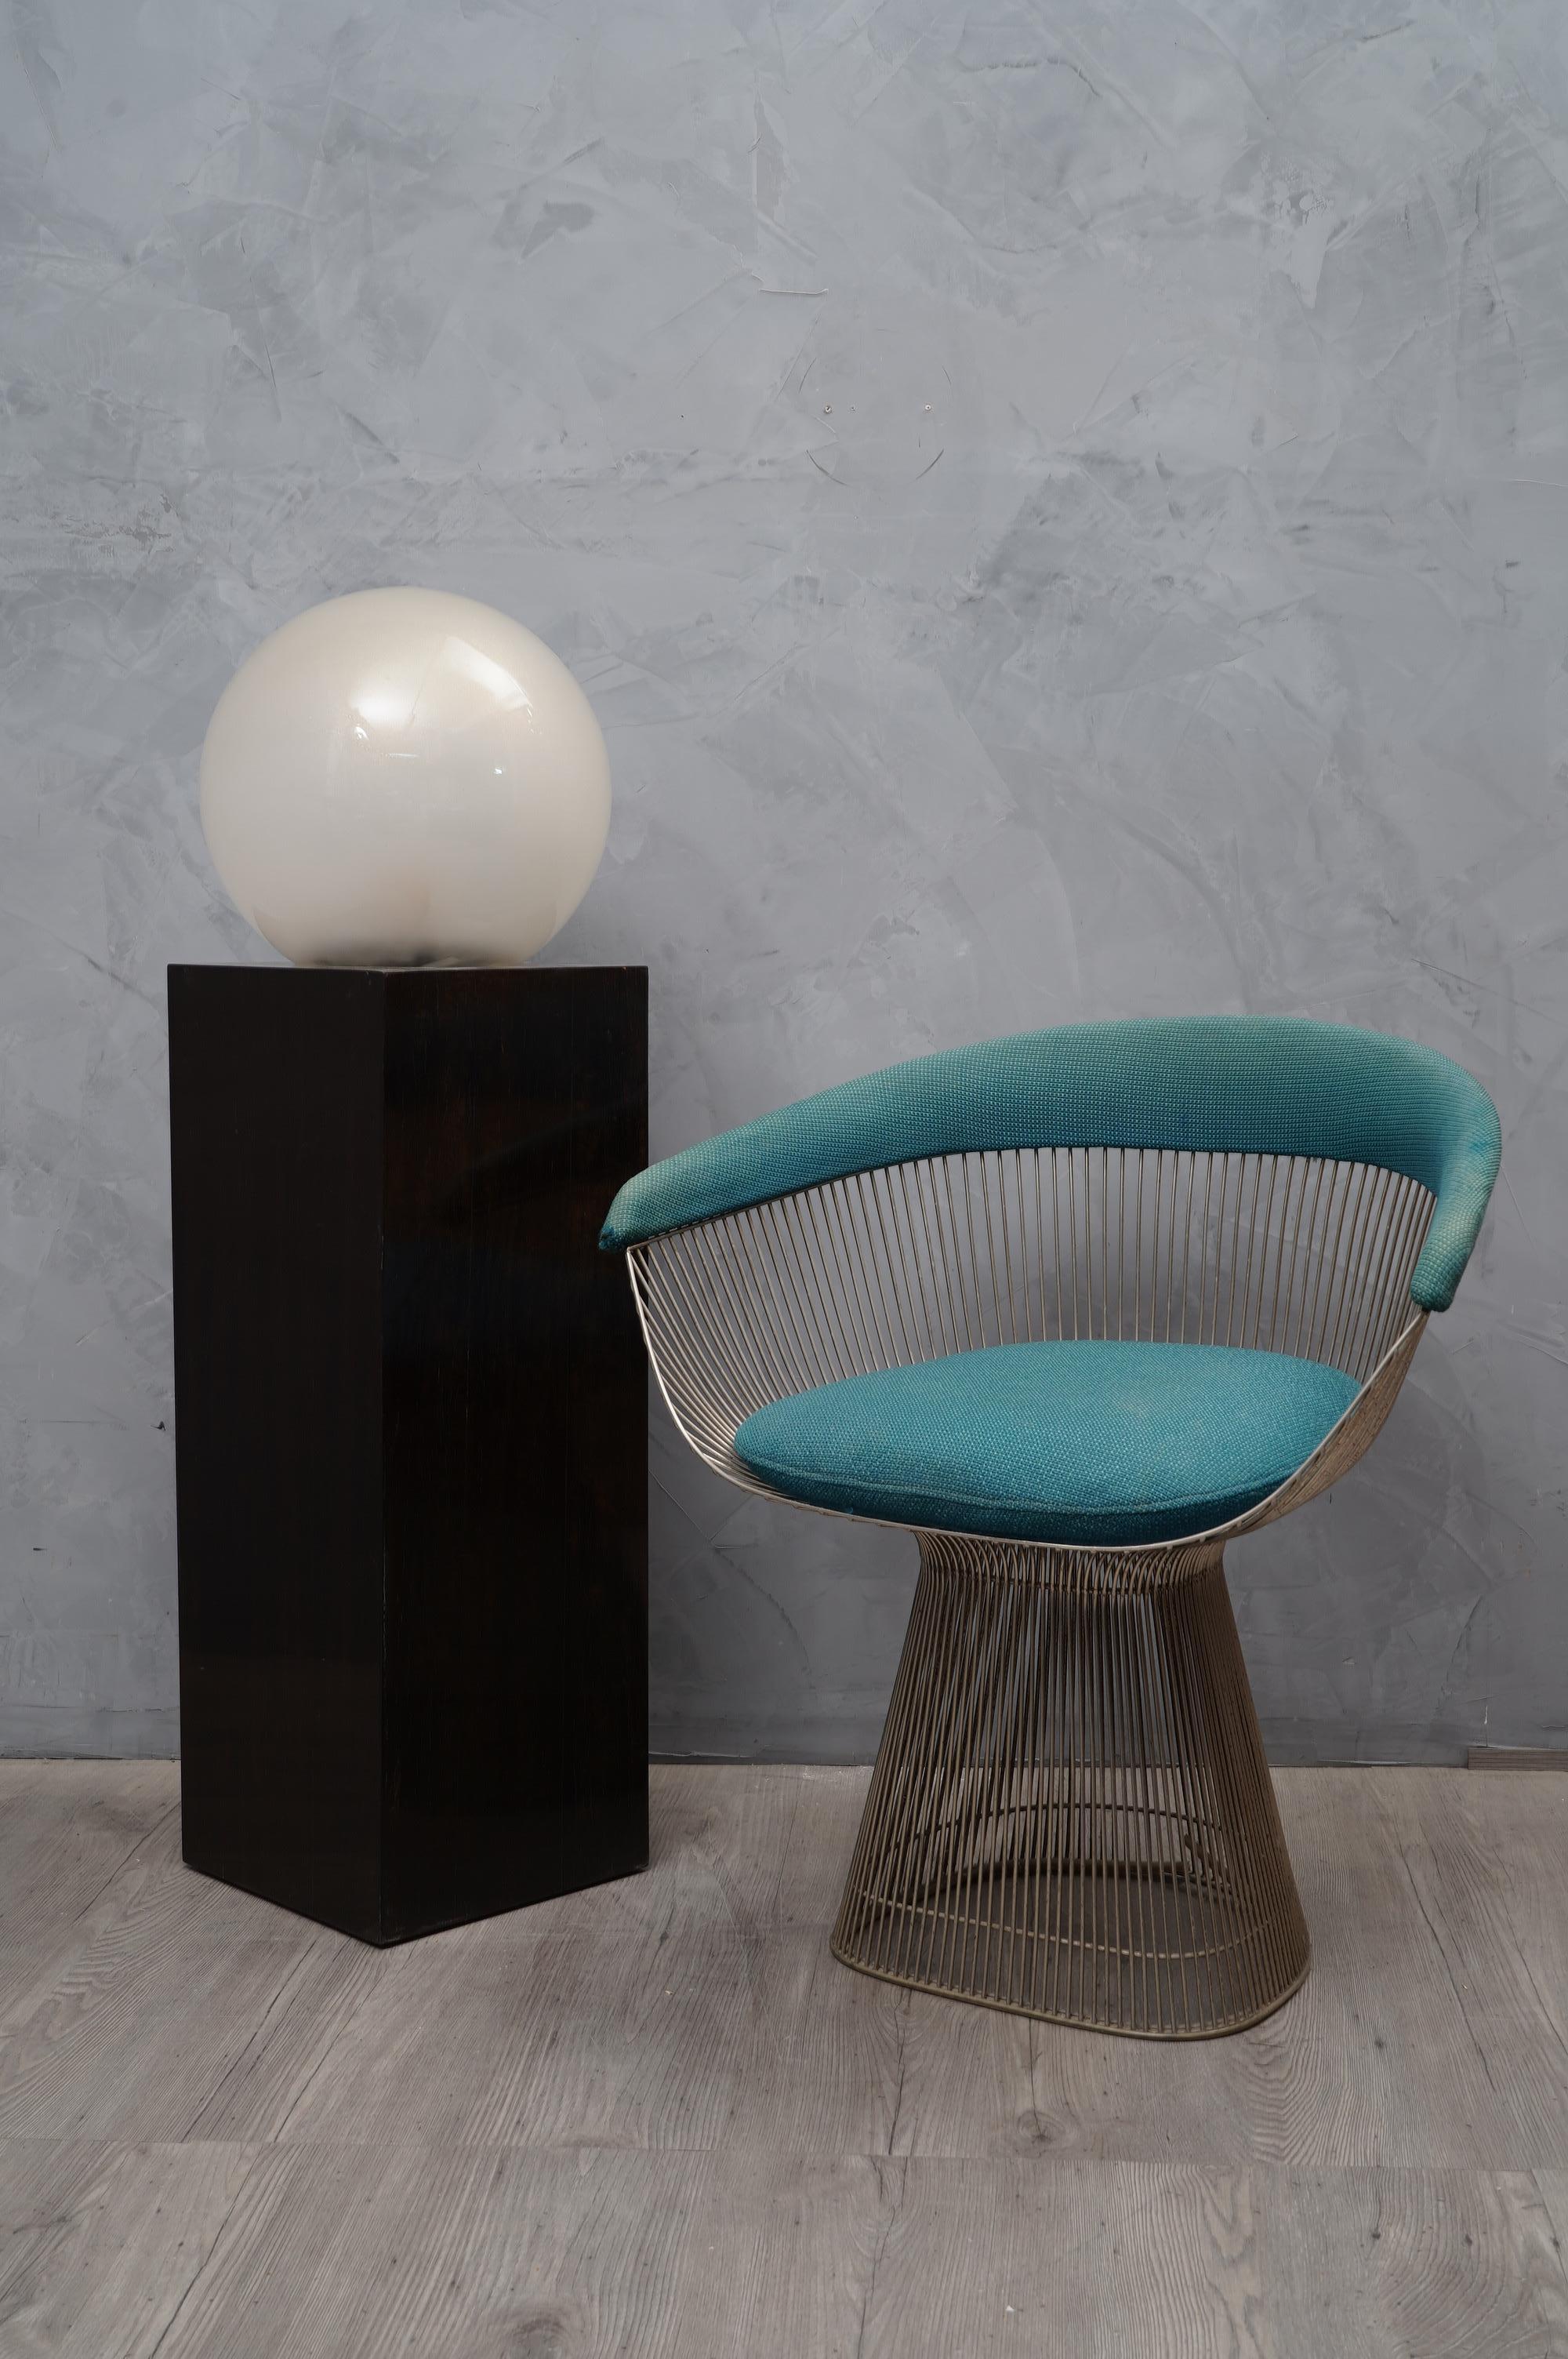 Stunning and unique of floor lamp, with a linear but super-elegant design also due to the use of very precious materials such as Murano glass and ebony / macassar wood.

The table lamps are composed by a large glass spheres positioned on height wood